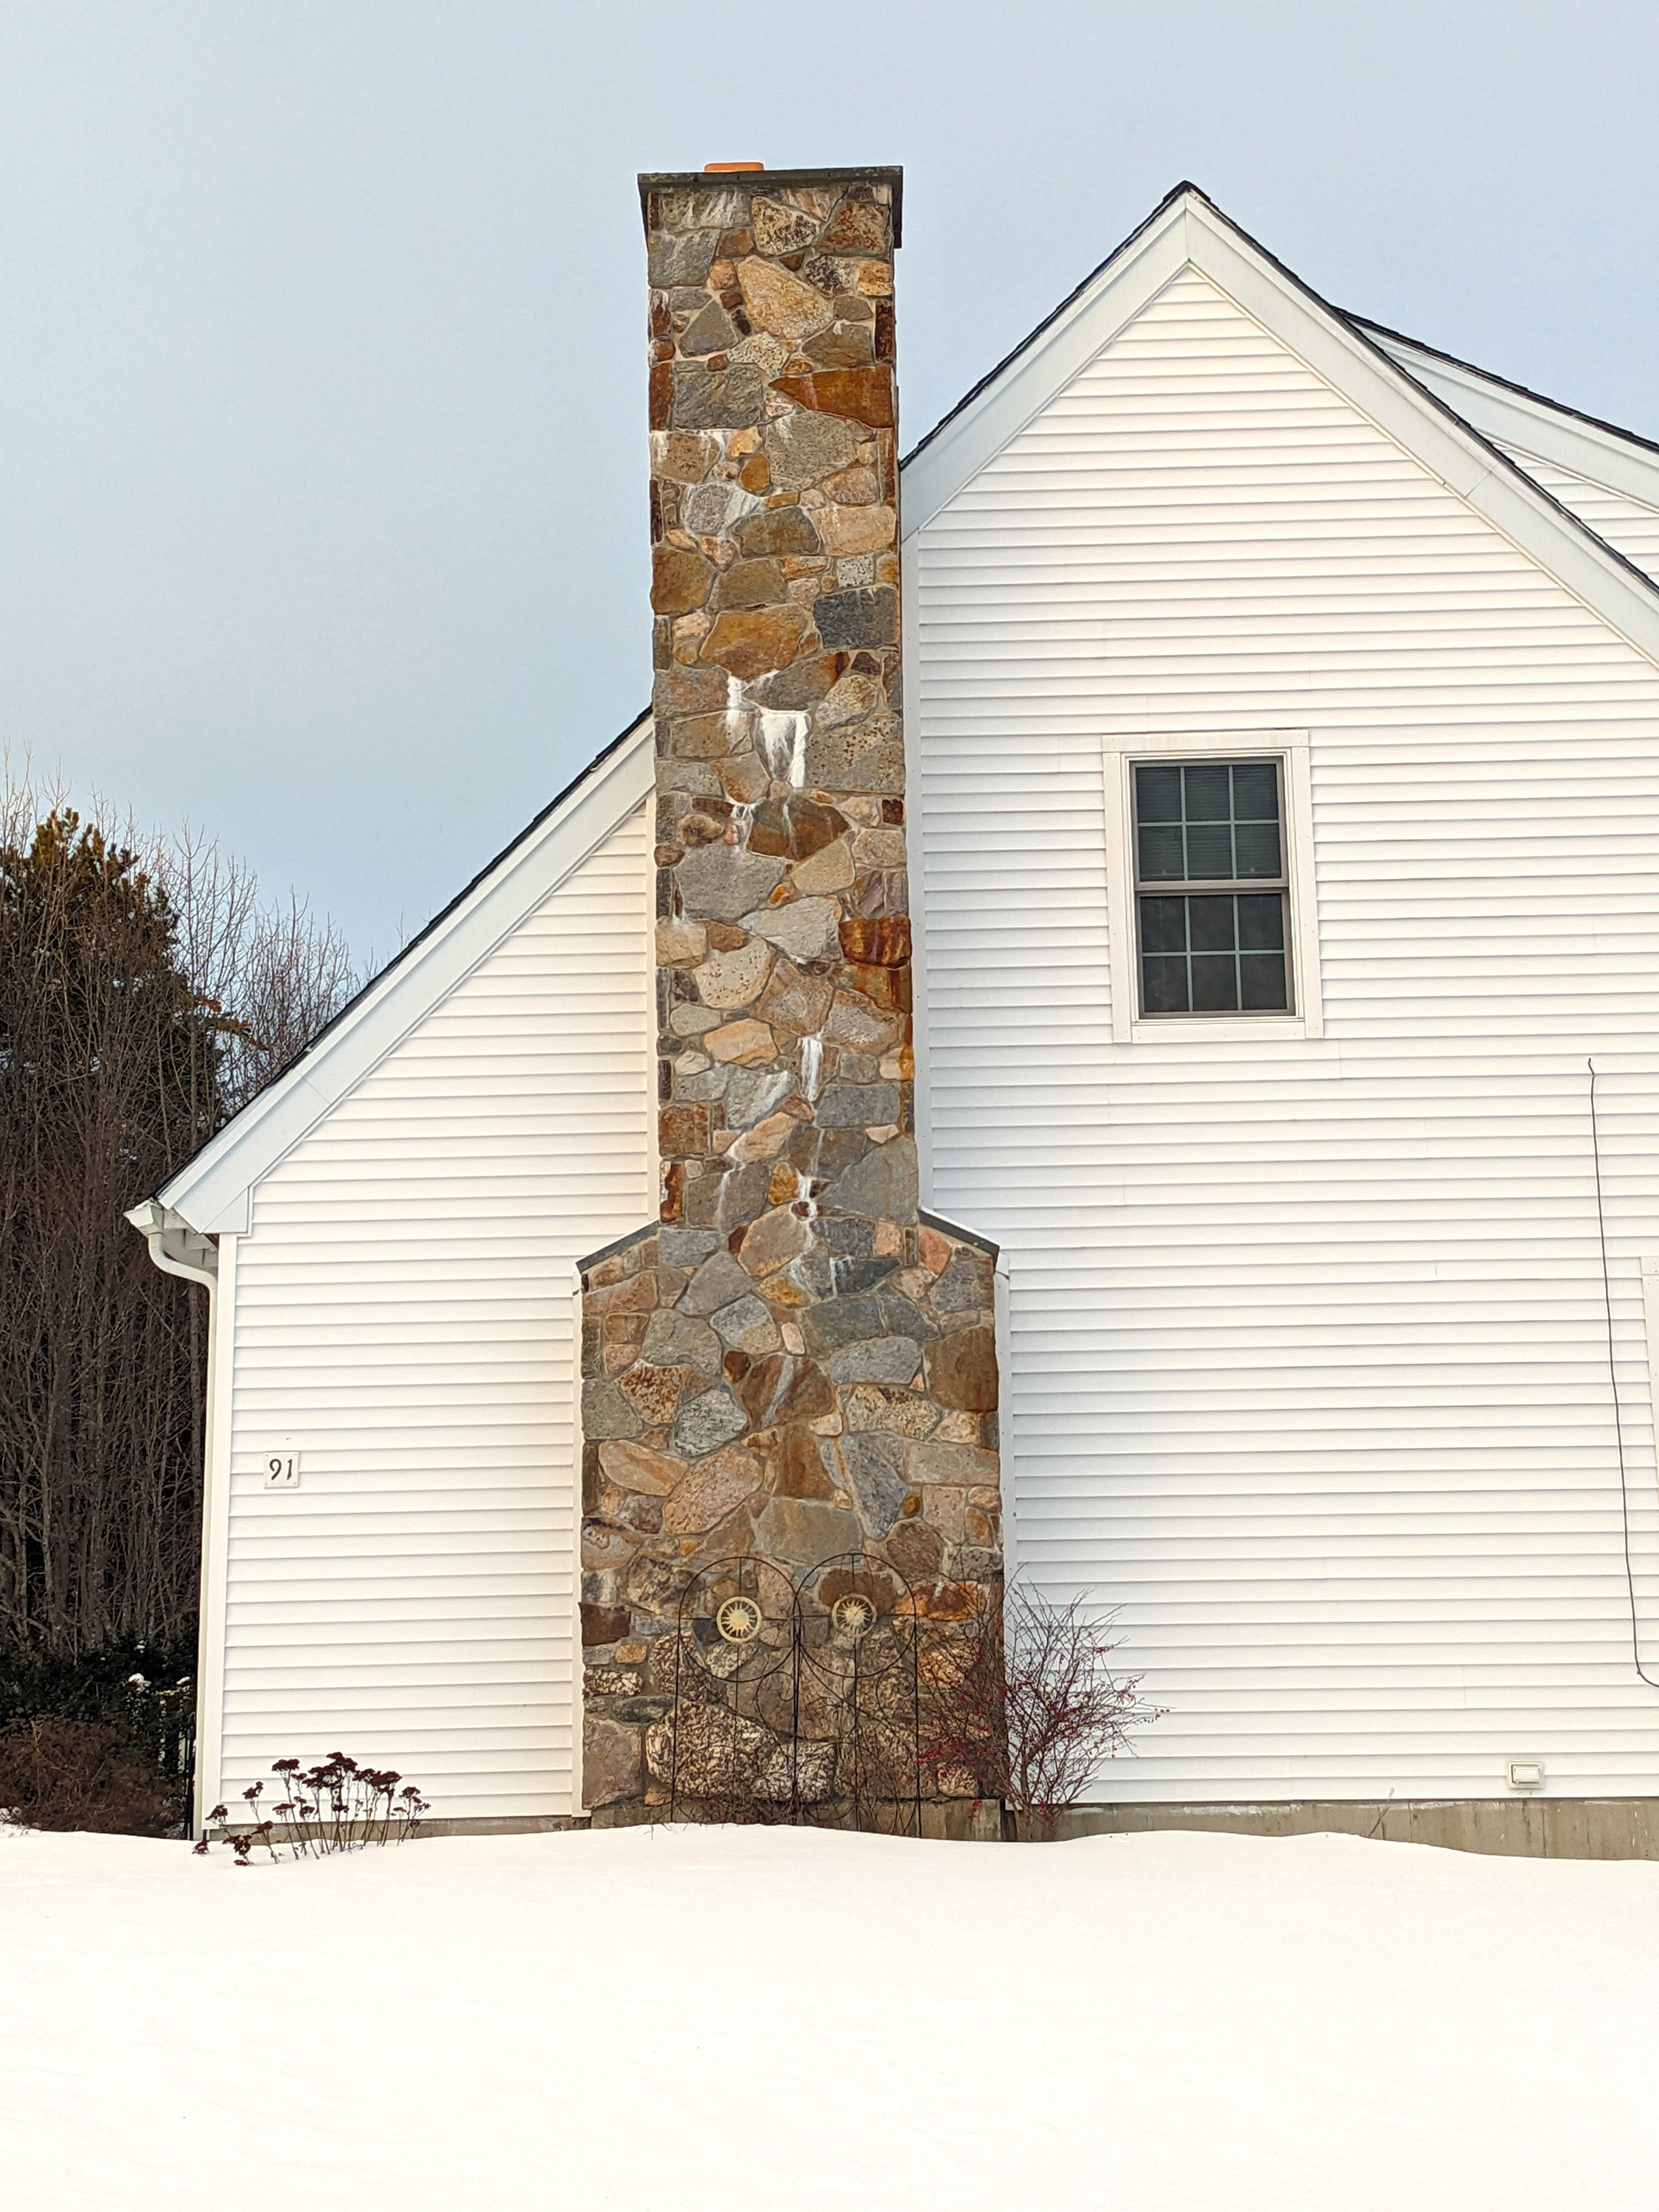 Ask the Builder: Your chimney could be the source of your roof leak